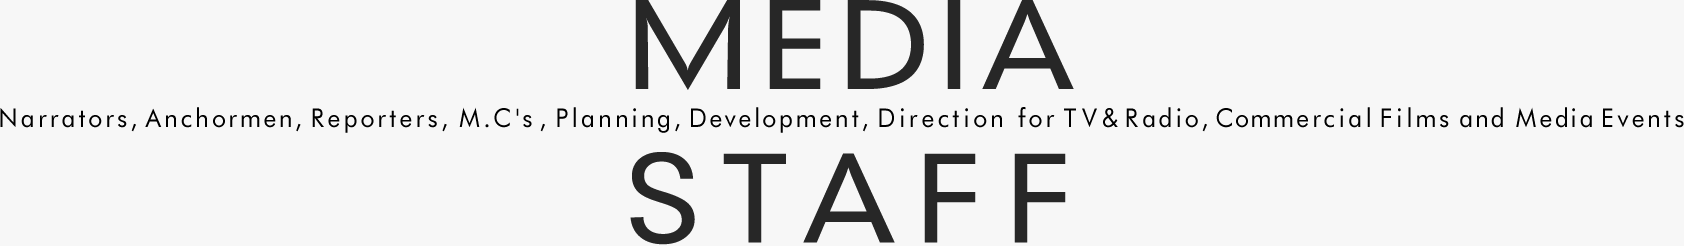 MEDIA STAFF Narrators, Anchormen, Reporters, M.C's, Planning, Development, Direction for TV&Radio, Commercial Films and Media Events